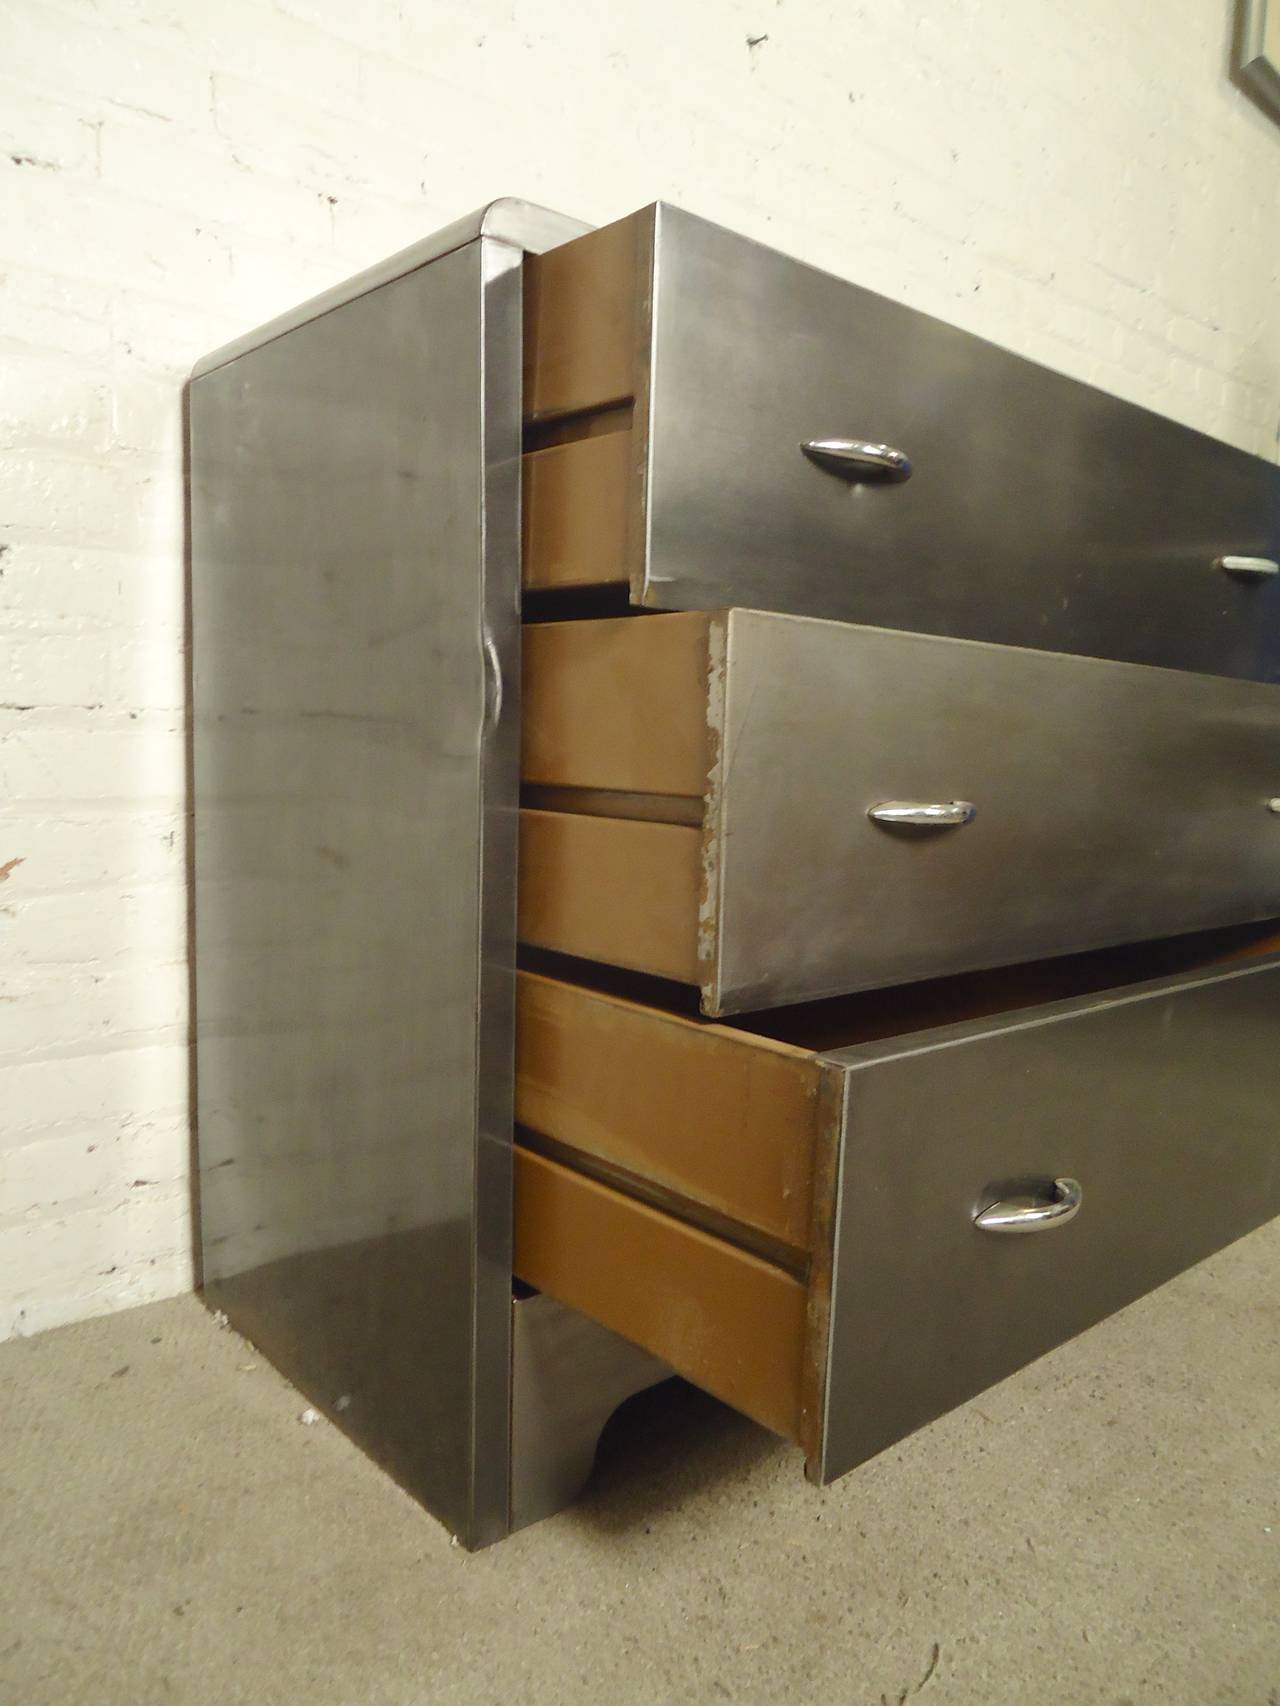 Mid-Century Modern metal dresser, refashioned with a brush metal finish. Three wide drawers, rounded edges and great patina throughout.

(Please confirm item location - NY or NJ - with dealer).